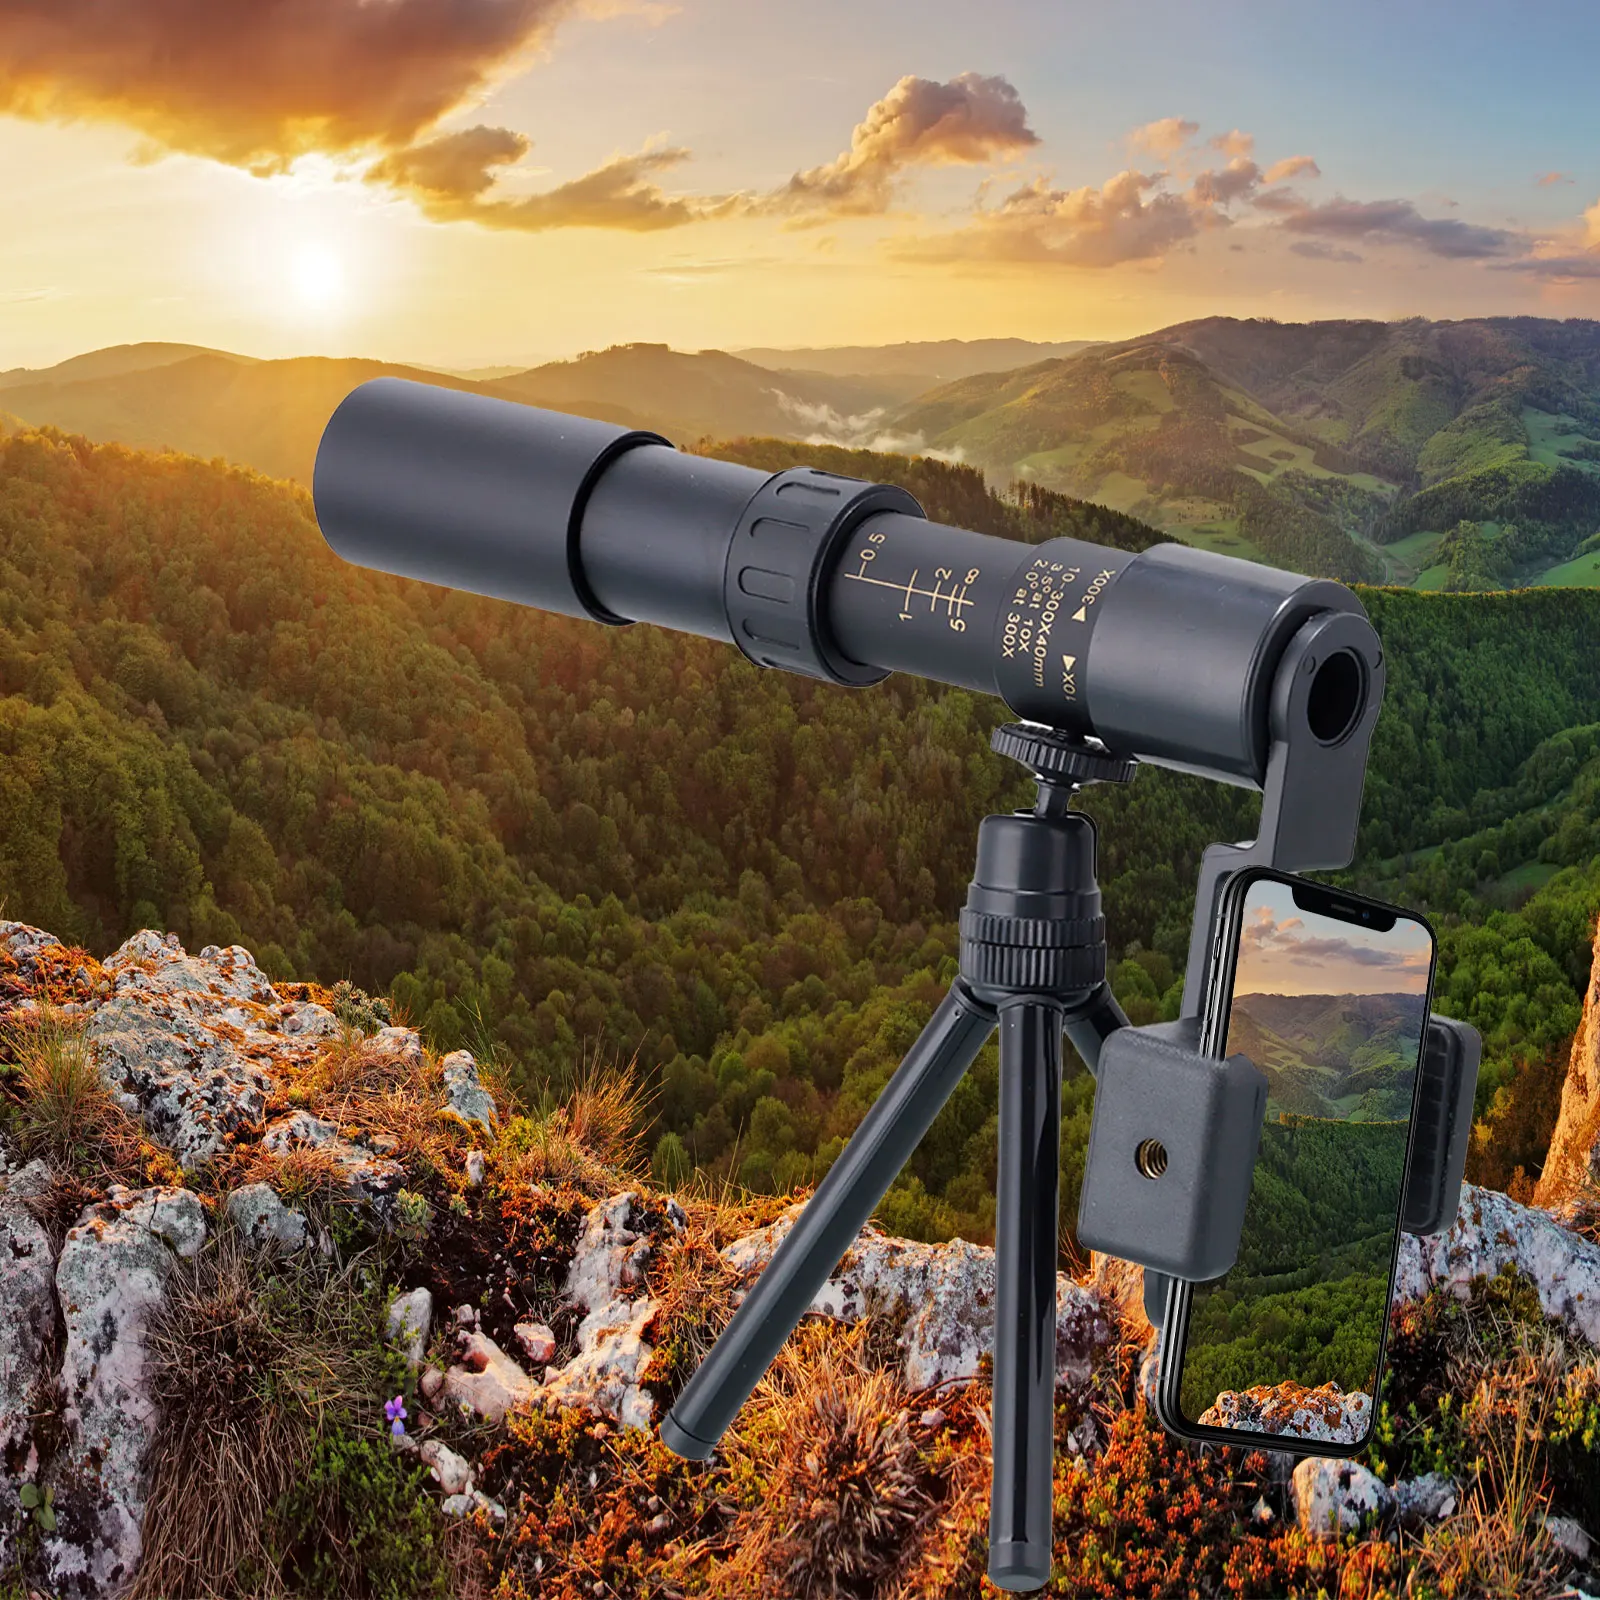 300x40 Monocular Powerful Binoculars Professional Long Range Telescope For Traveling Hunting Camping With High-Definition View